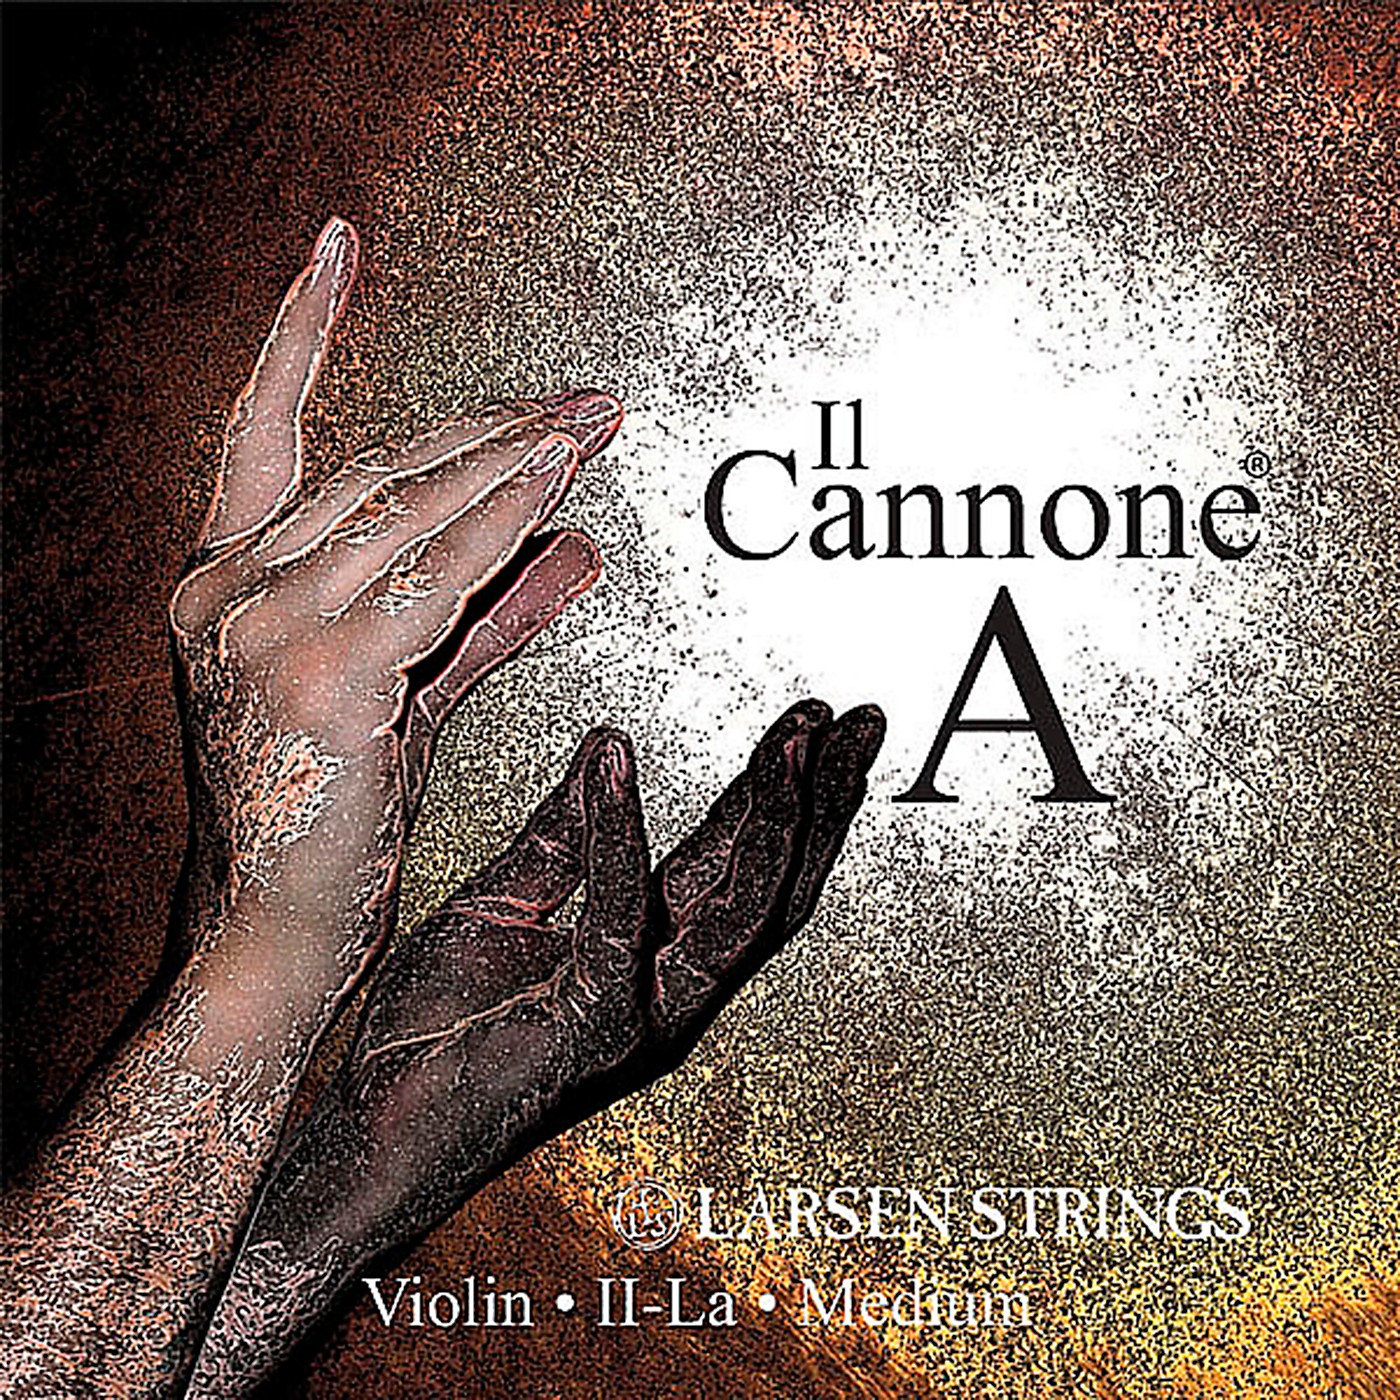 Larsen Strings Il Cannone Violin A String thumbnail